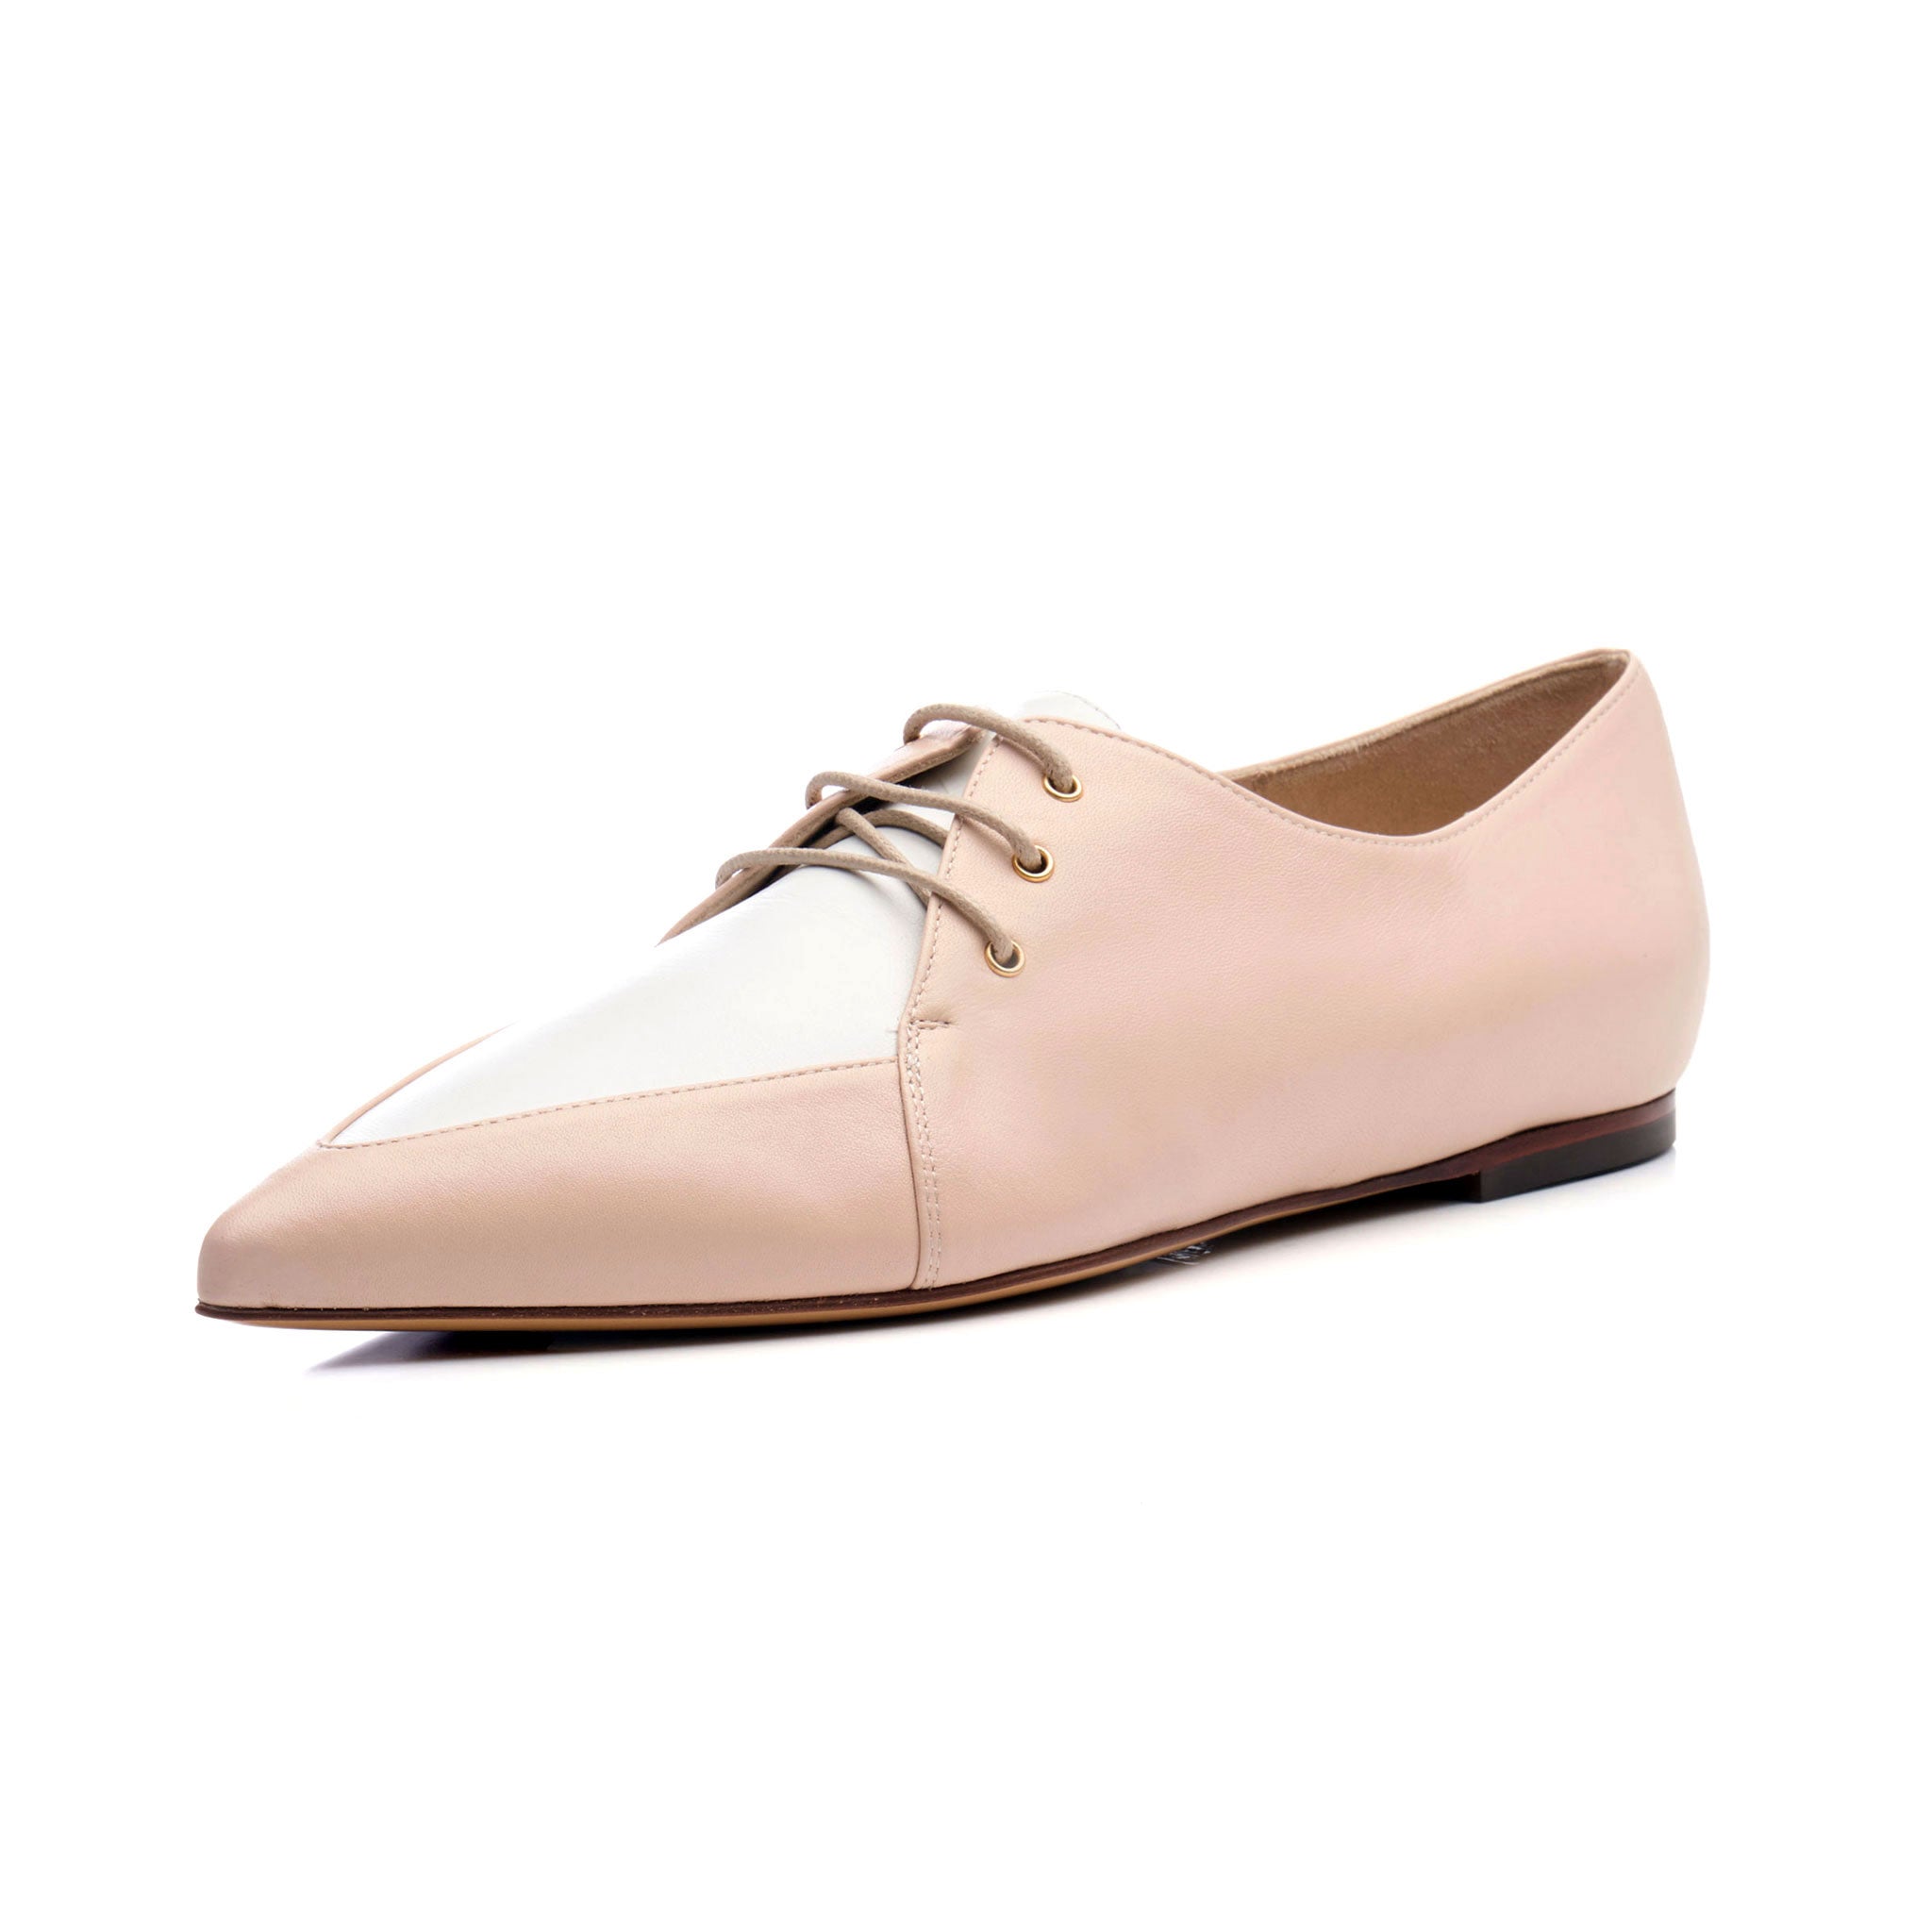 business casual spectator Oxford shoes for women made of leather in a nude blush pastel color.